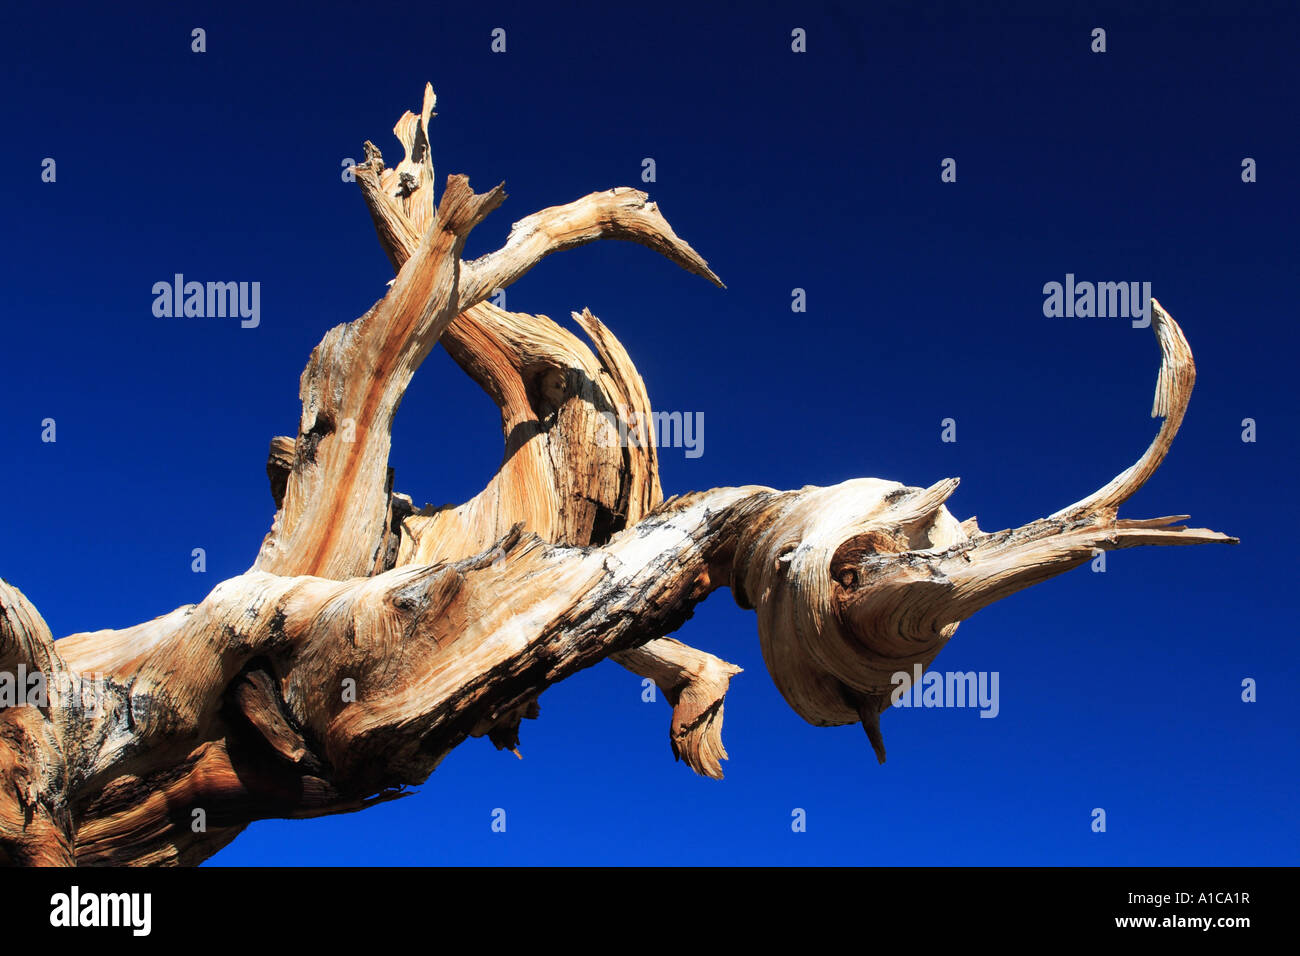 great basin bristlecone pine (Pinus longaeva), branch in front of blue sky, oldest plant species of the world, USA, California, Stock Photo